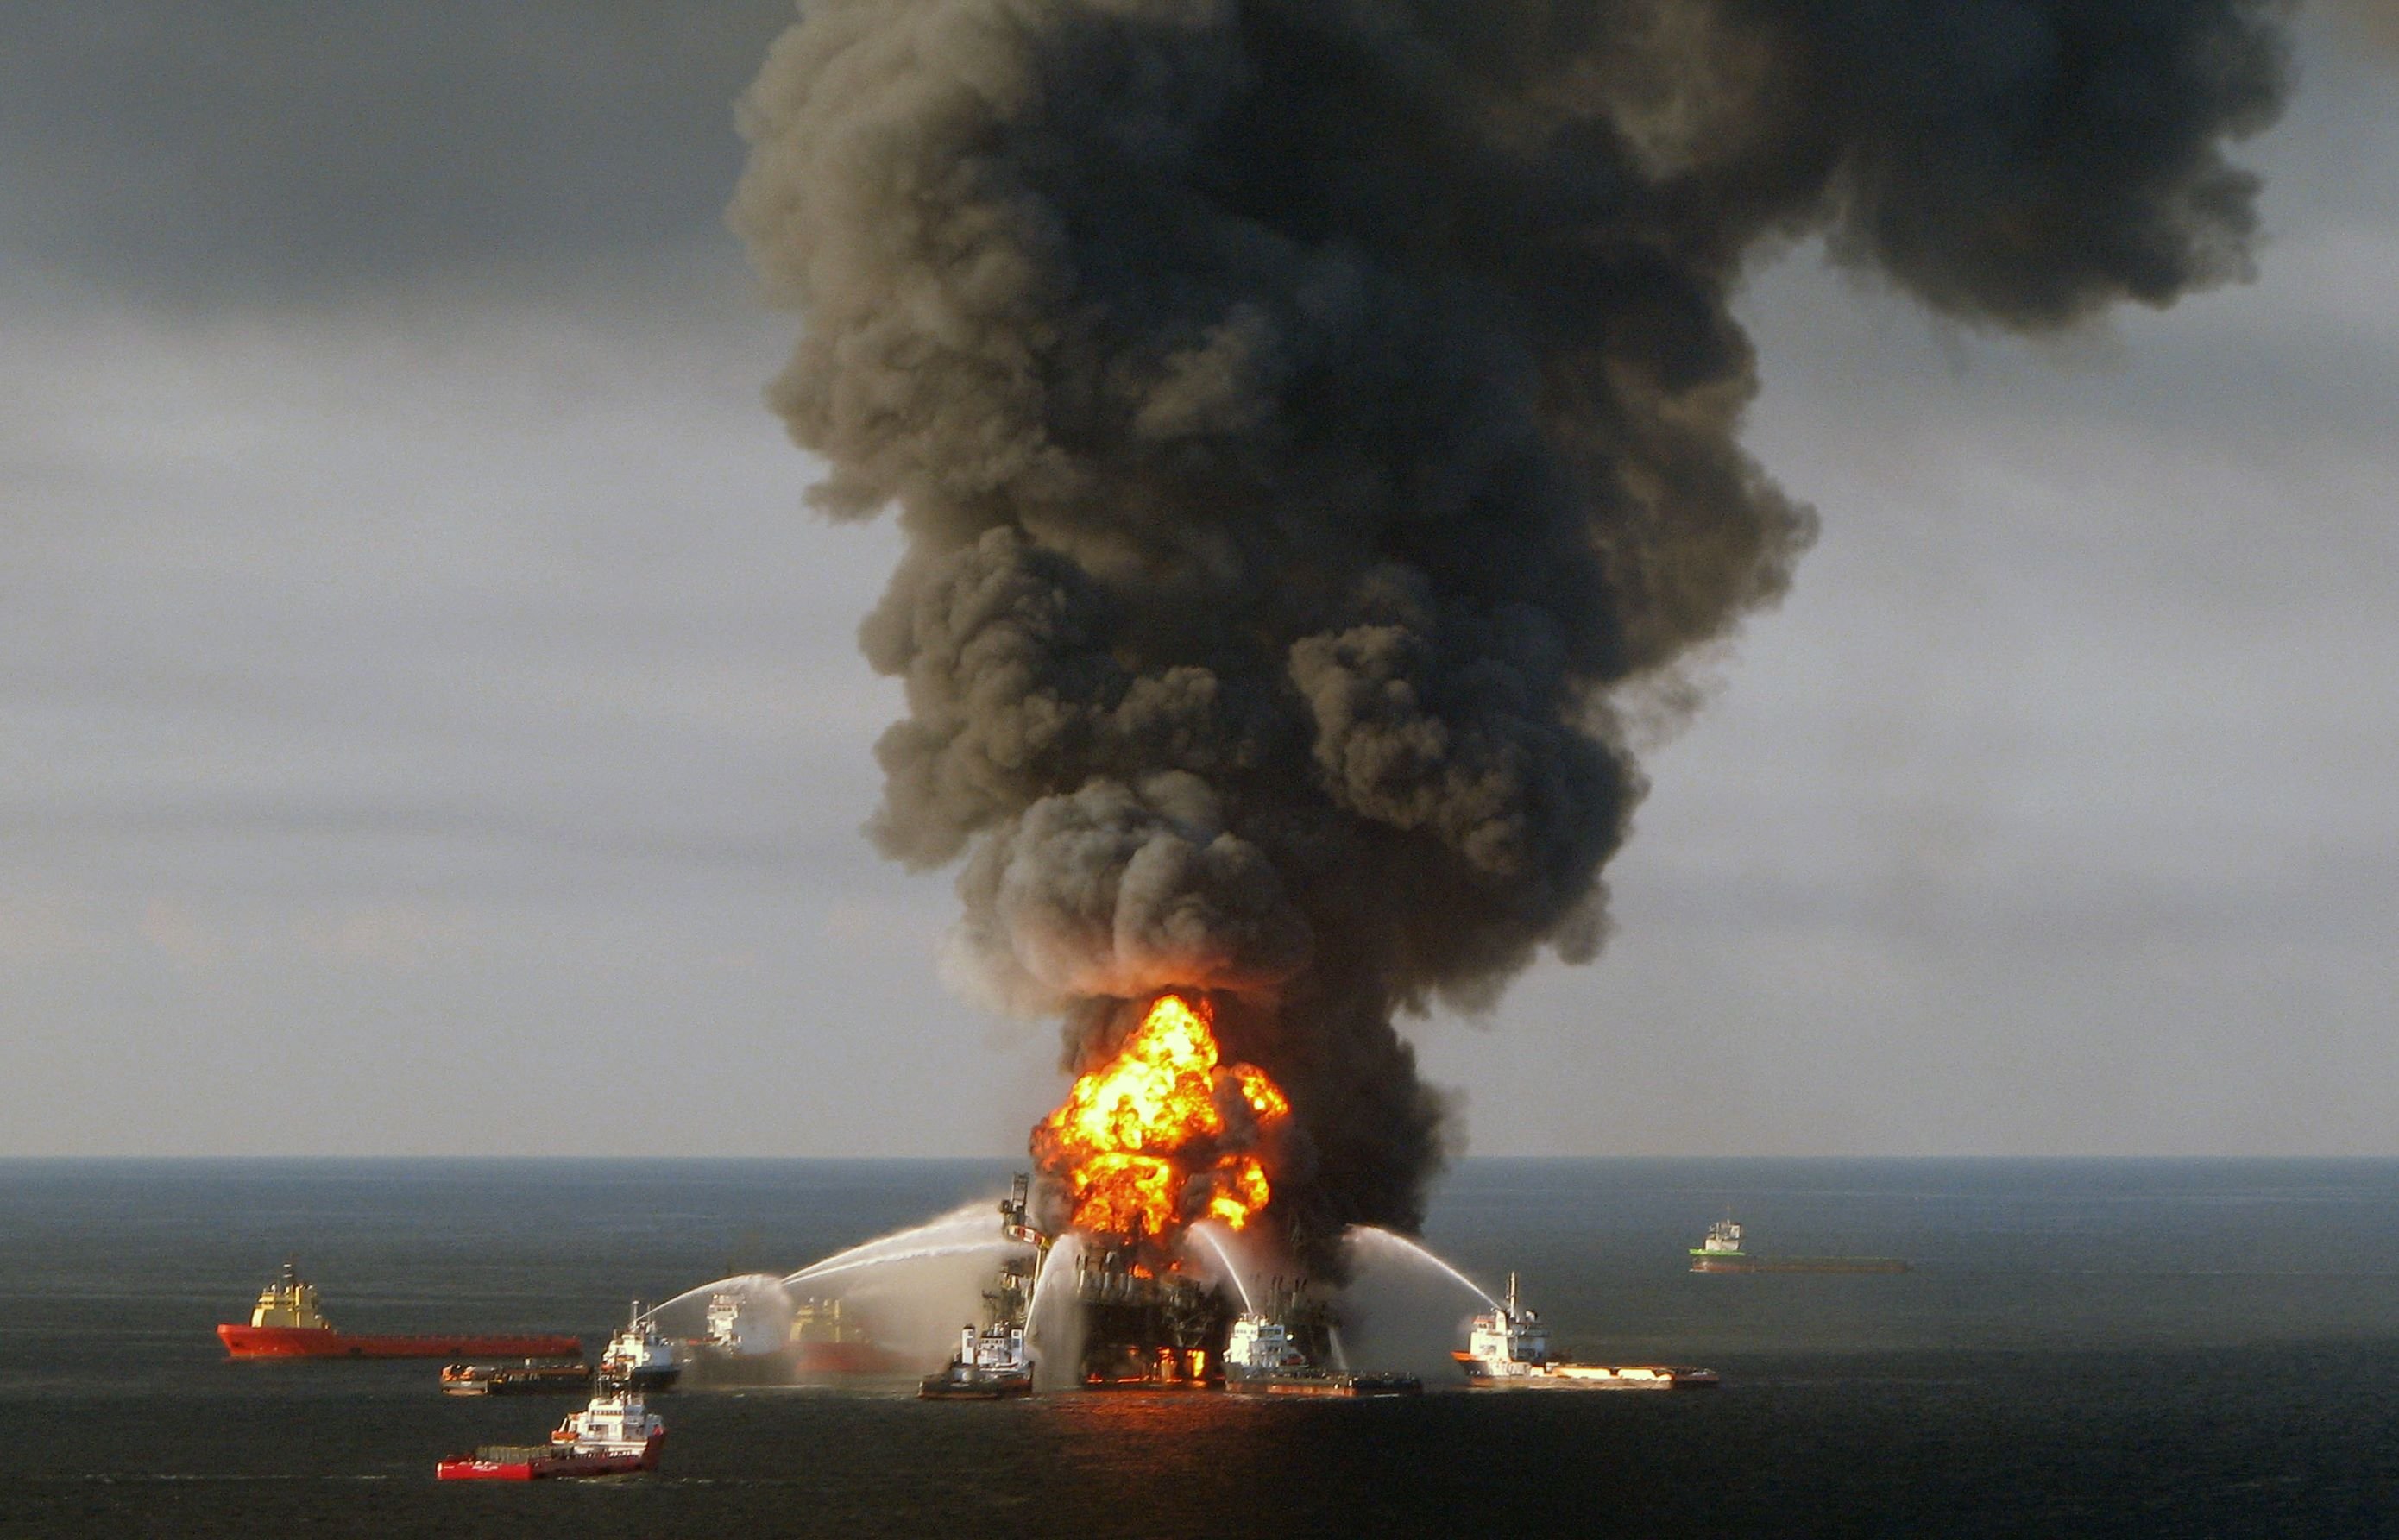 (FILES) A file photo taken on on April 21, 2010 shows a US Coast Guard handout image of fire boat response crews as they battle the blazing remnants of the BP operated off shore oil rig, Deepwater Horizon, in the Gulf of Mexico. British energy giant BP will pay a record $20.8 billion to settle government claims for damages stemming from the deadly 2010 Gulf of Mexico oil spill, US Attorney General Loretta Lynch said October 5, 2015."This historic resolution is a strong and fitting response to the worst environmental disaster in American history," Lynch said at a press conference. "BP is receiving the punishment it deserves, while also providing critical compensation for the injuries it caused to the environment and the economy of the Gulf region." AFP PHOTO/US COAST GUARD/RESTRICTED TO EDITORIAL USE